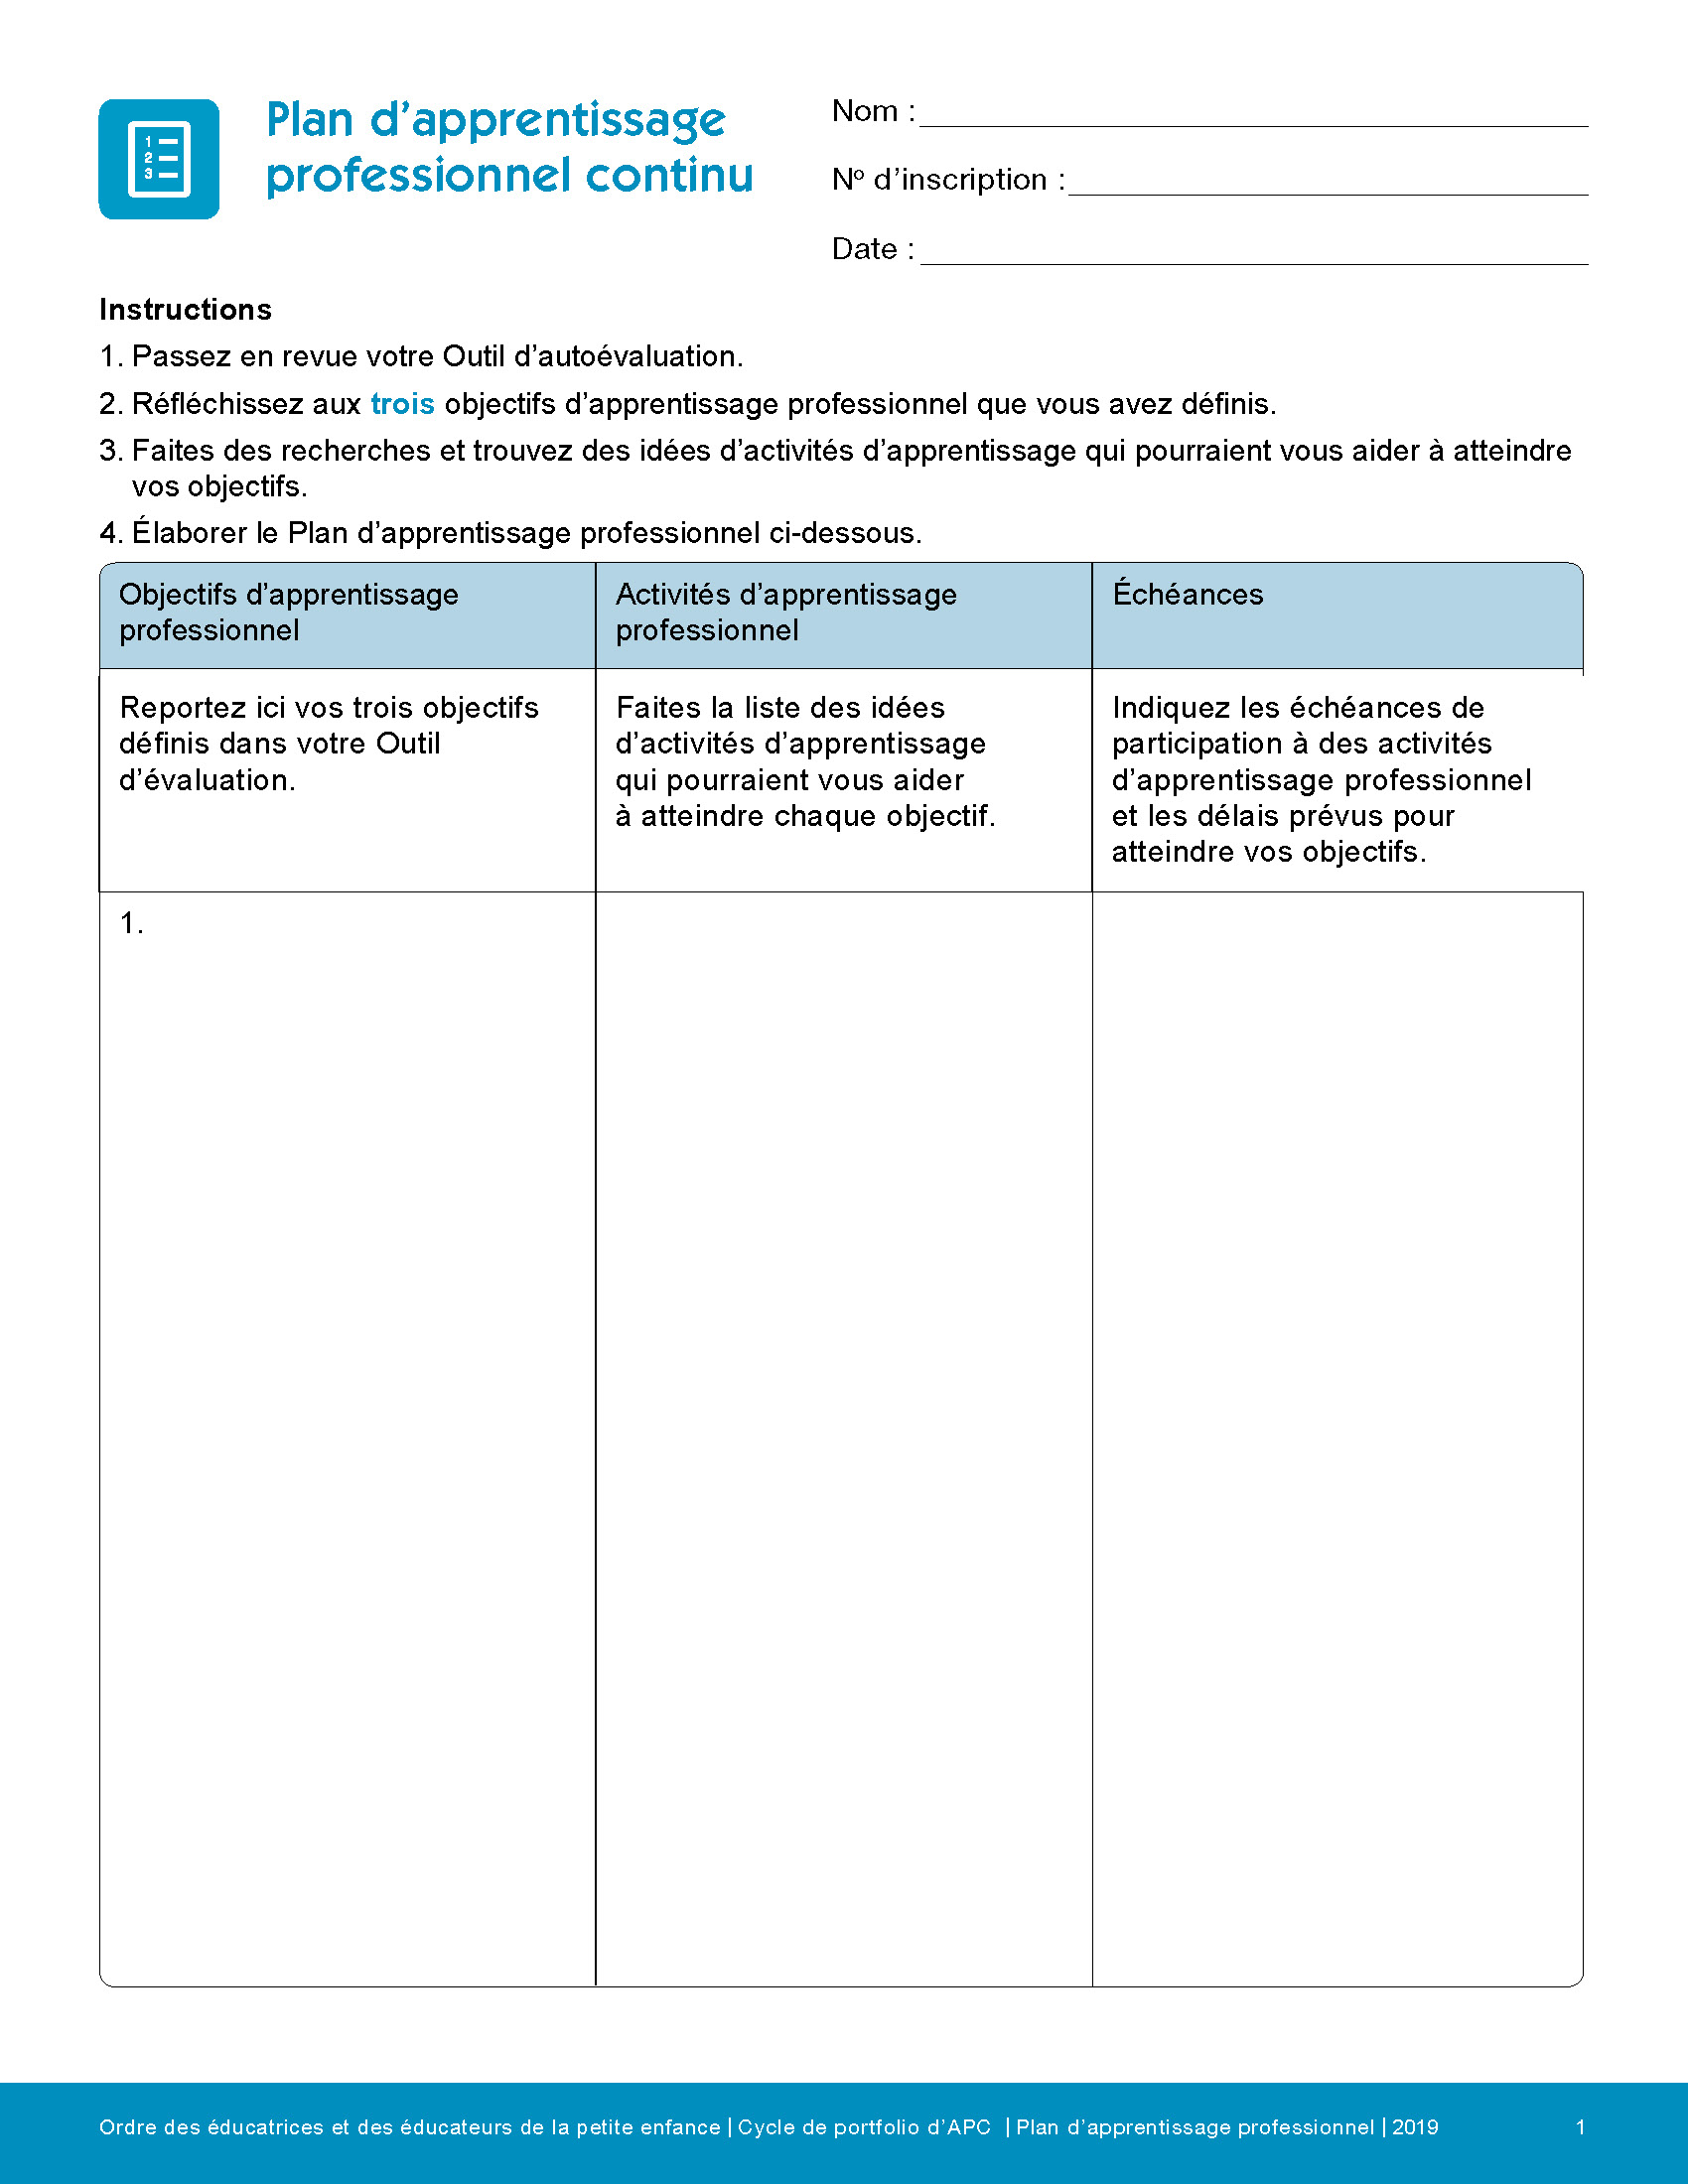 Professional Learning Plan